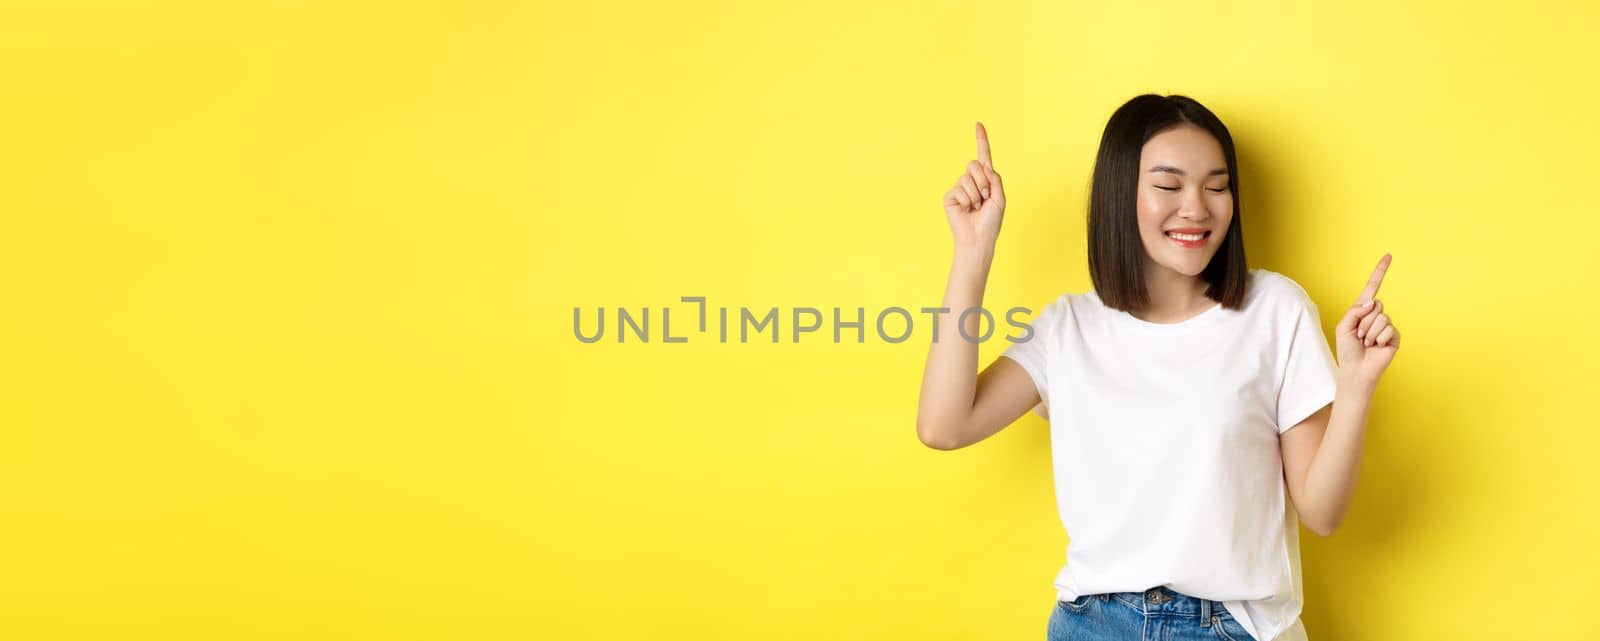 Happy asian woman dancing and having fun, posing in white t-shirt against yellow background.